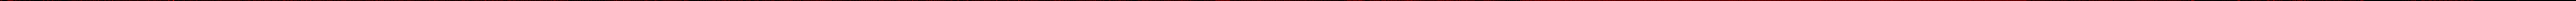 gradient-red.png